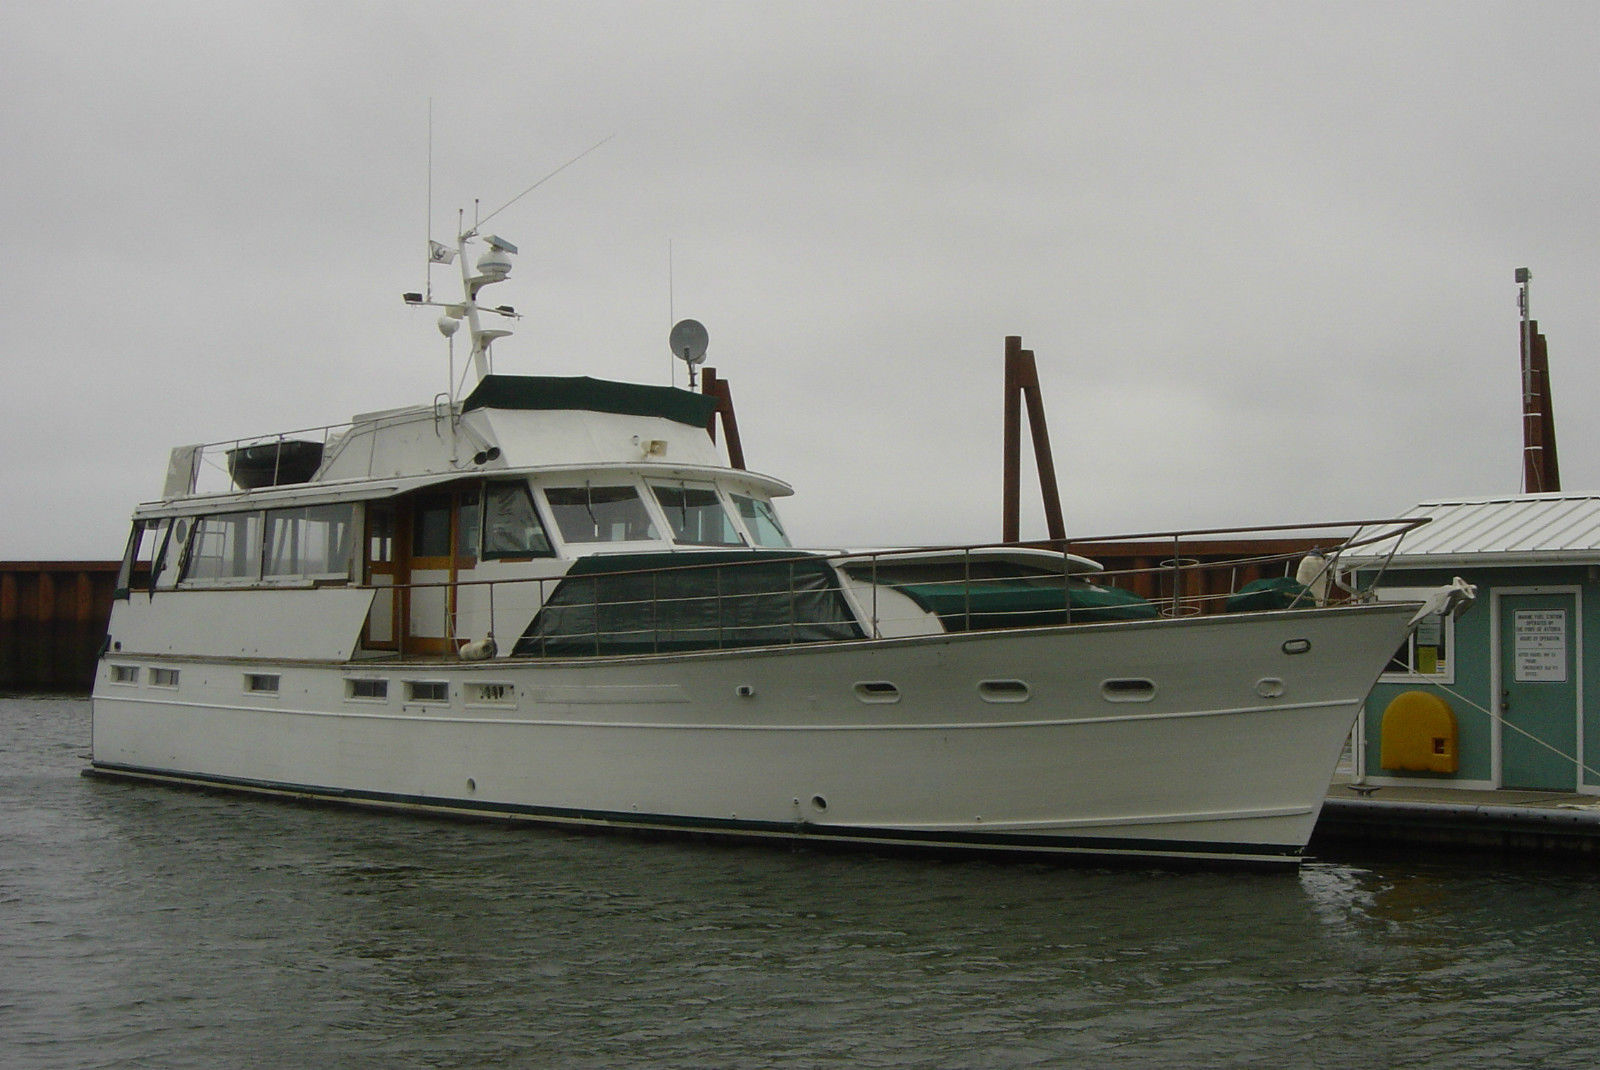 Pacemaker Yacht 1972 for sale for $95,000 - Boats-from-USA.com